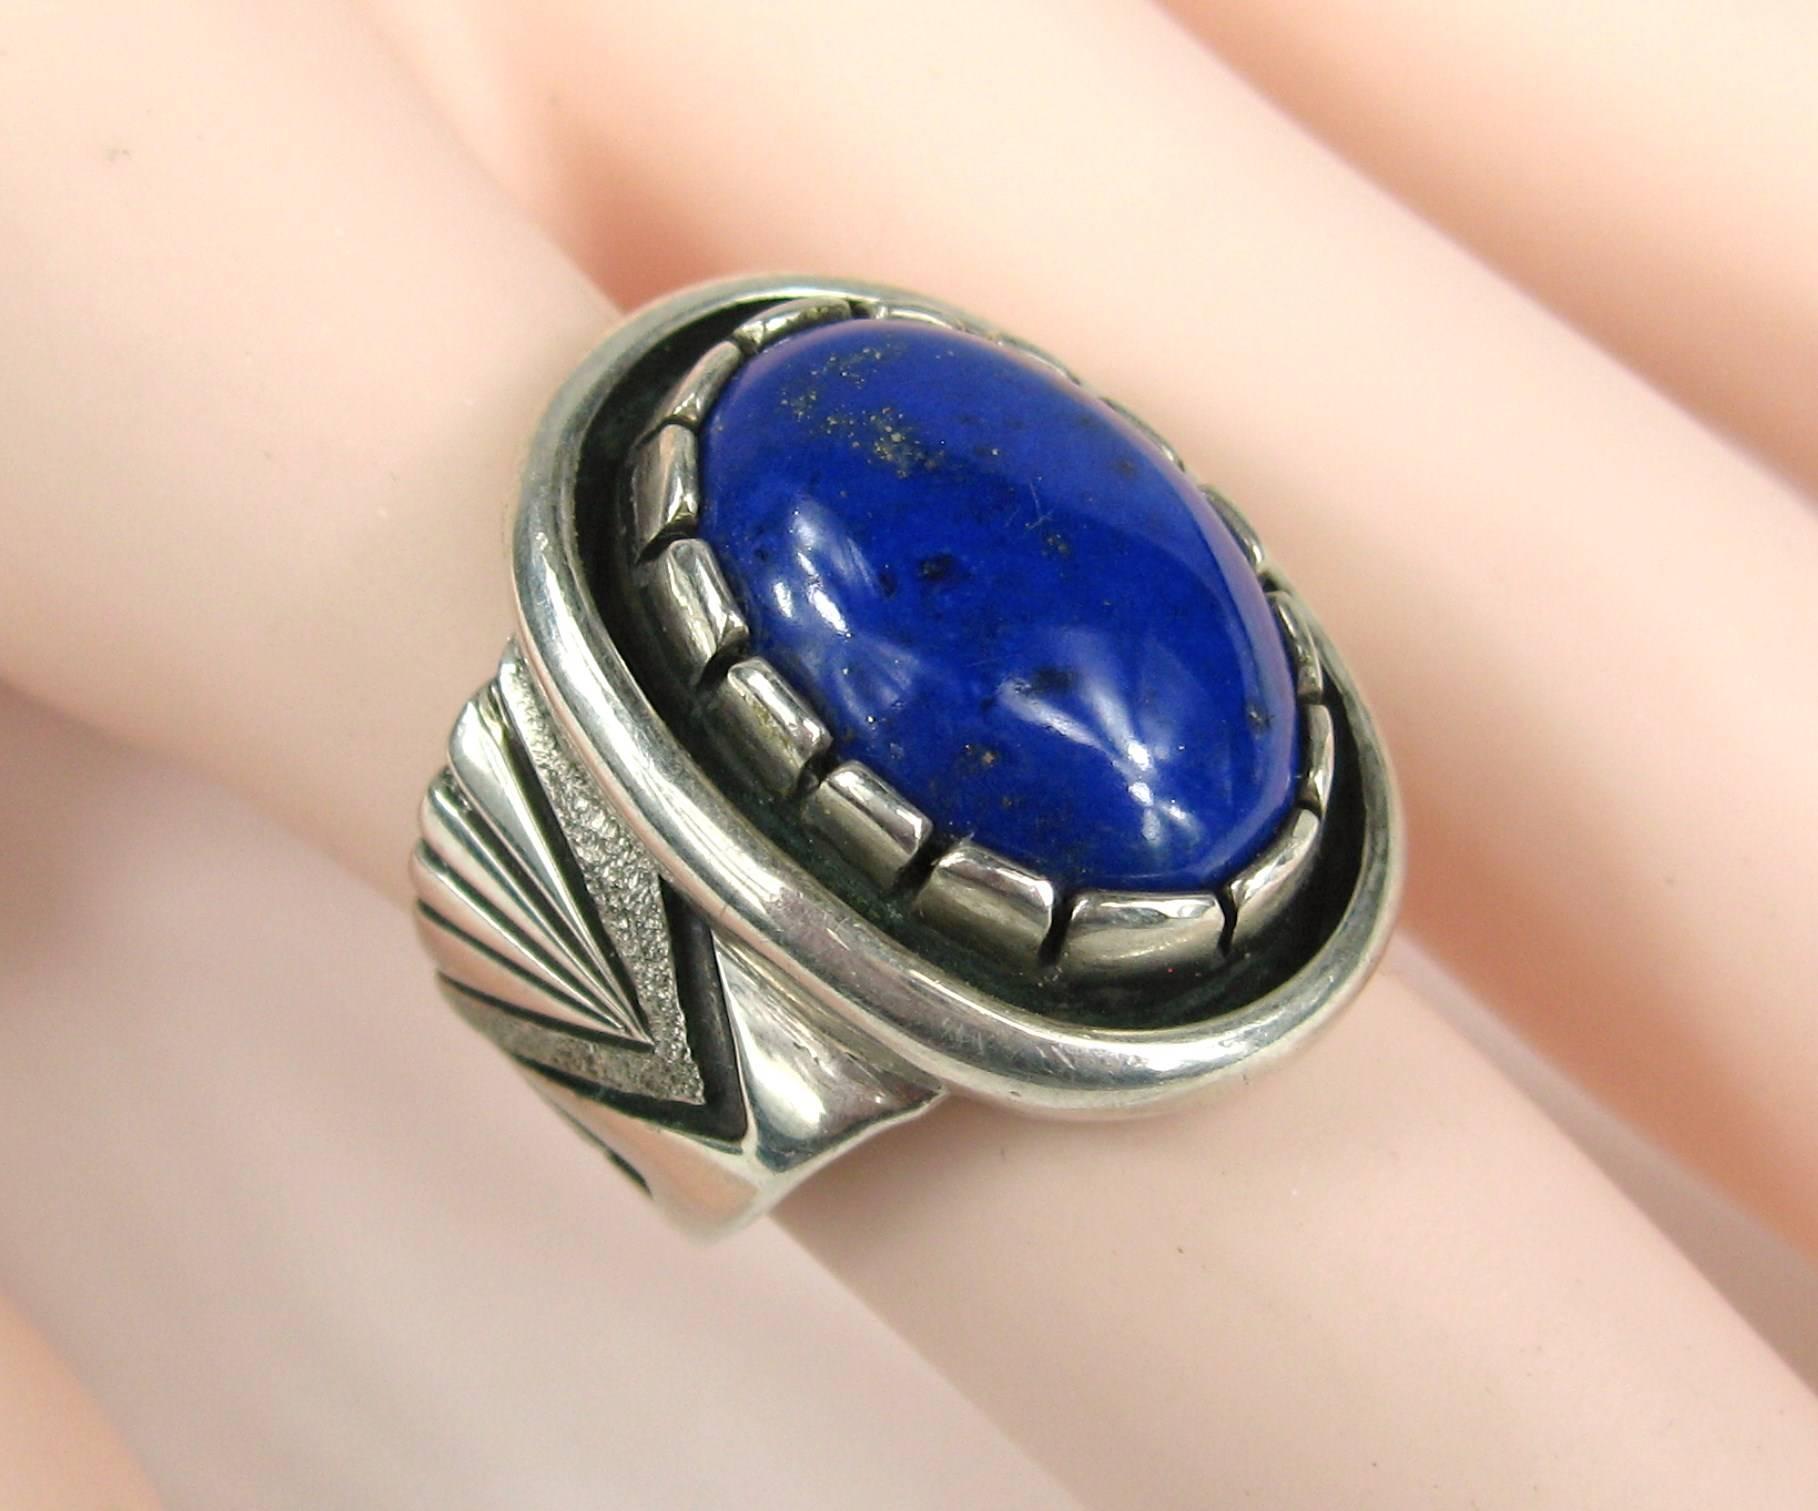 Another wonderful Sterling silver Native American Lapis Shadow Box Ring. Look at the detailing on the shank of this ring. The ring is a size 6 and measures 1.00 in top to bottom x .75 wide. The band graduates from a .59 down to .23 at the back. This